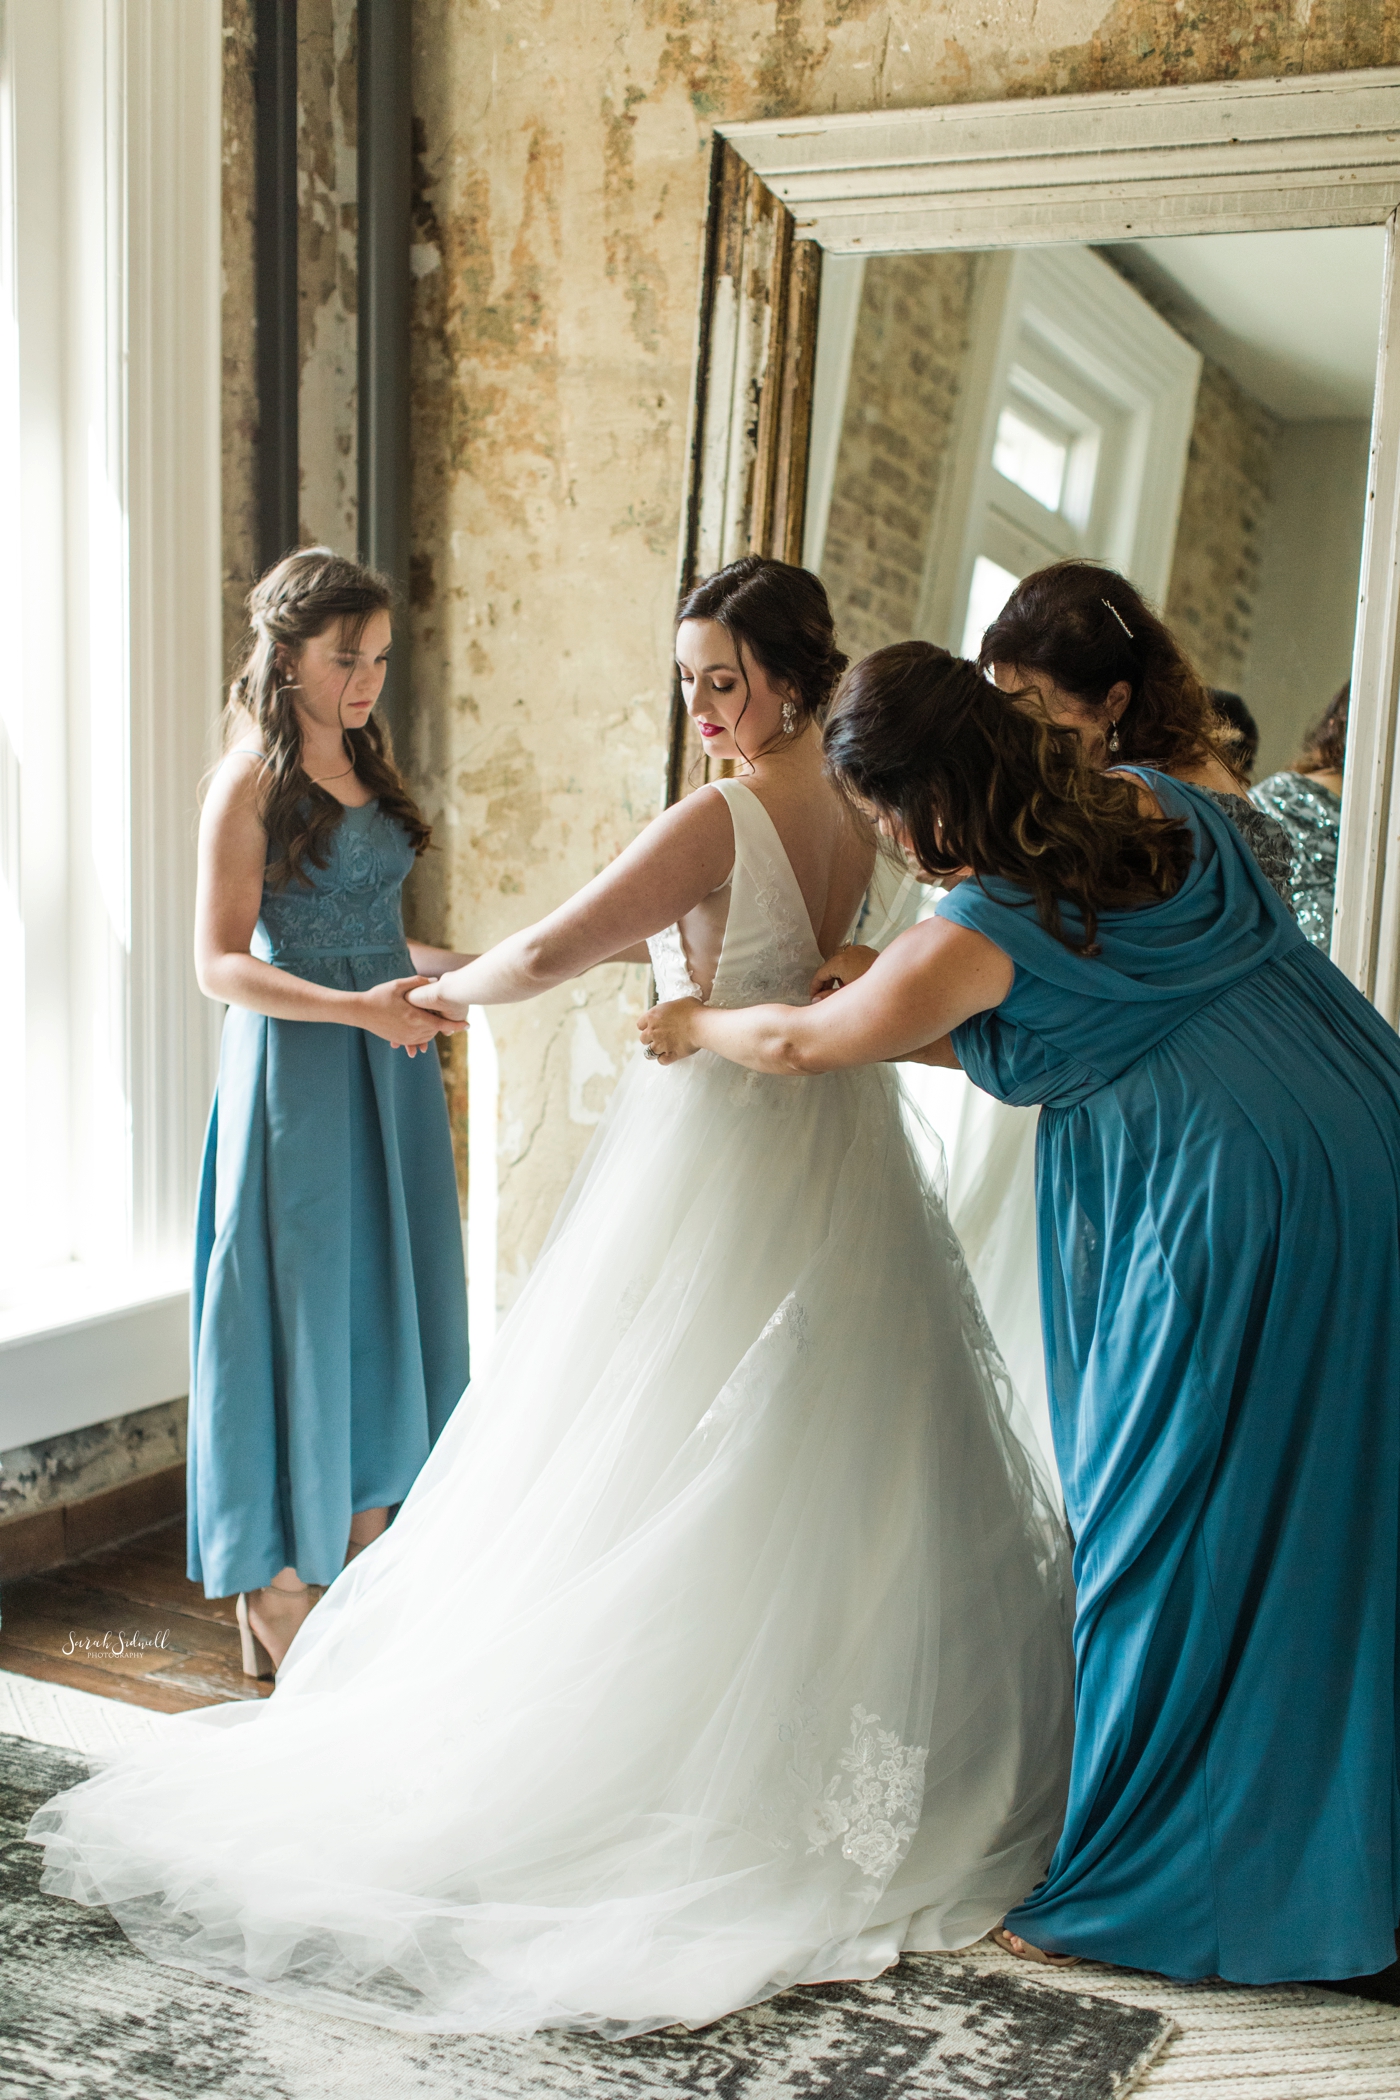 A bridesmaid zips up the bride's dress. 